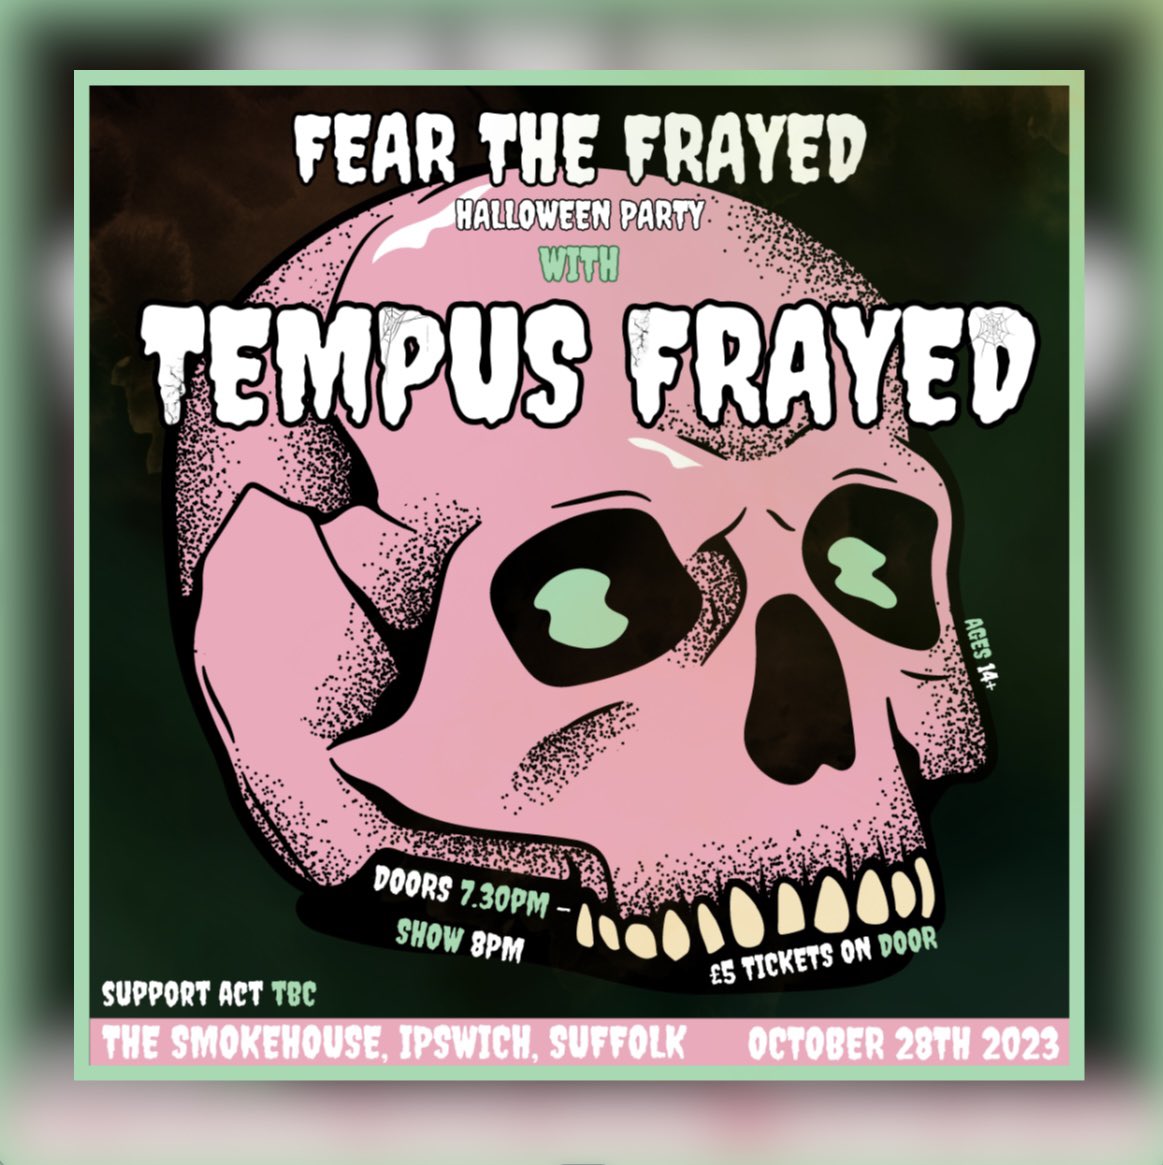 YOUR HALLOWEEN JUST GOT BUSY!🎃 If you want a rocking Halloween then this is the event for you! 💀👻 We look forward to seeing you all there for a night of Drinks, Rock n Roll, Spookiness and optional fancy dress😜 Fear The Frayed 🖤 £5 OTD Age 14+ Support act TBC